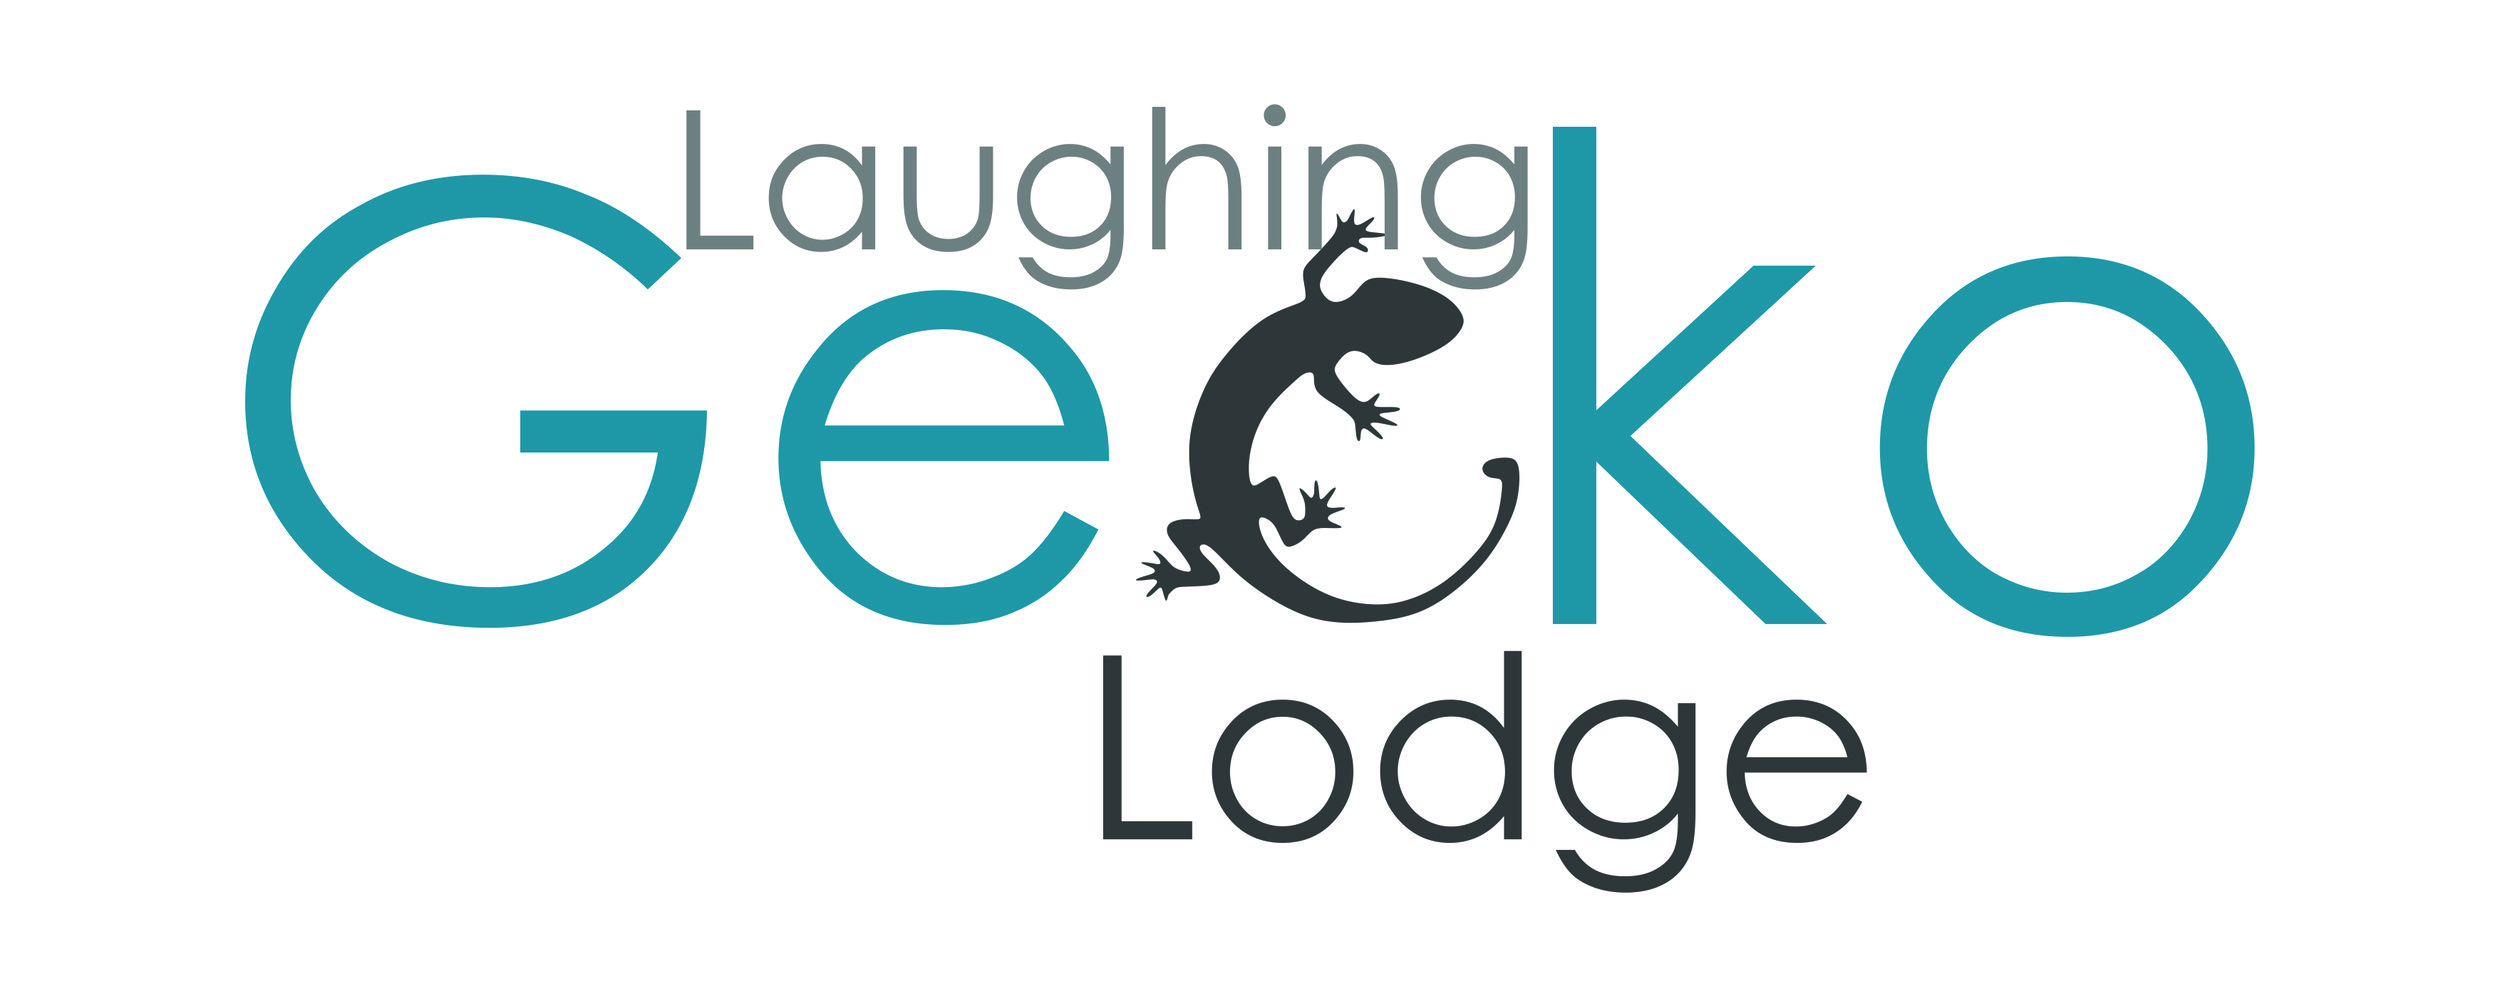 Laughing Gecko Lodge